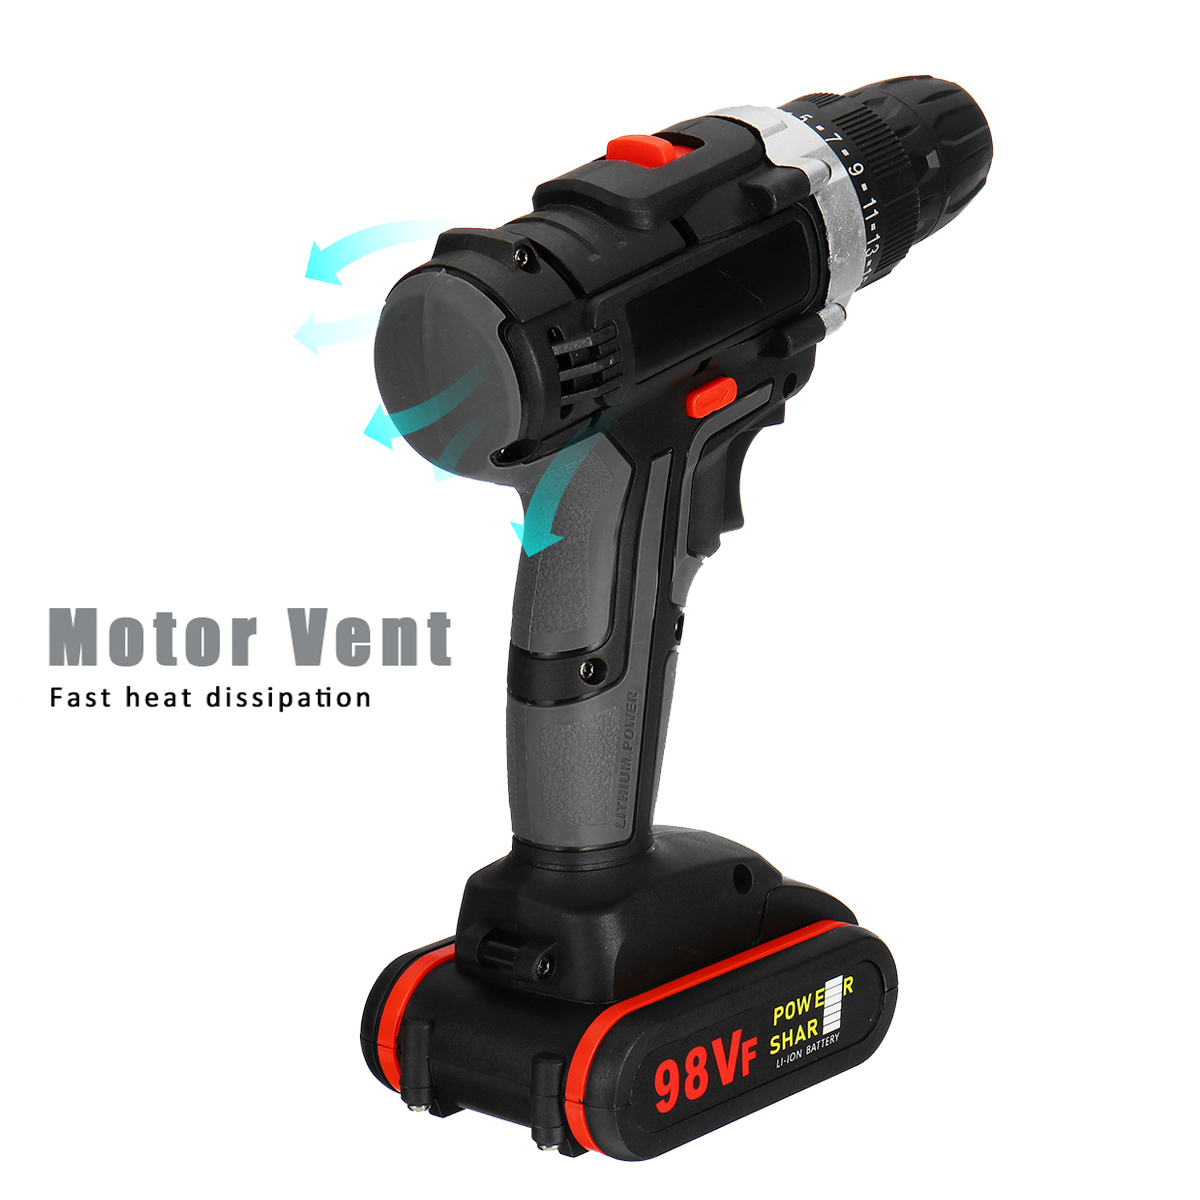 98VF-Cordless-Electric-Impact-Drill-Screwdriver-251-Torque-Rechargeable-Household-Screwdriver-1764622-6